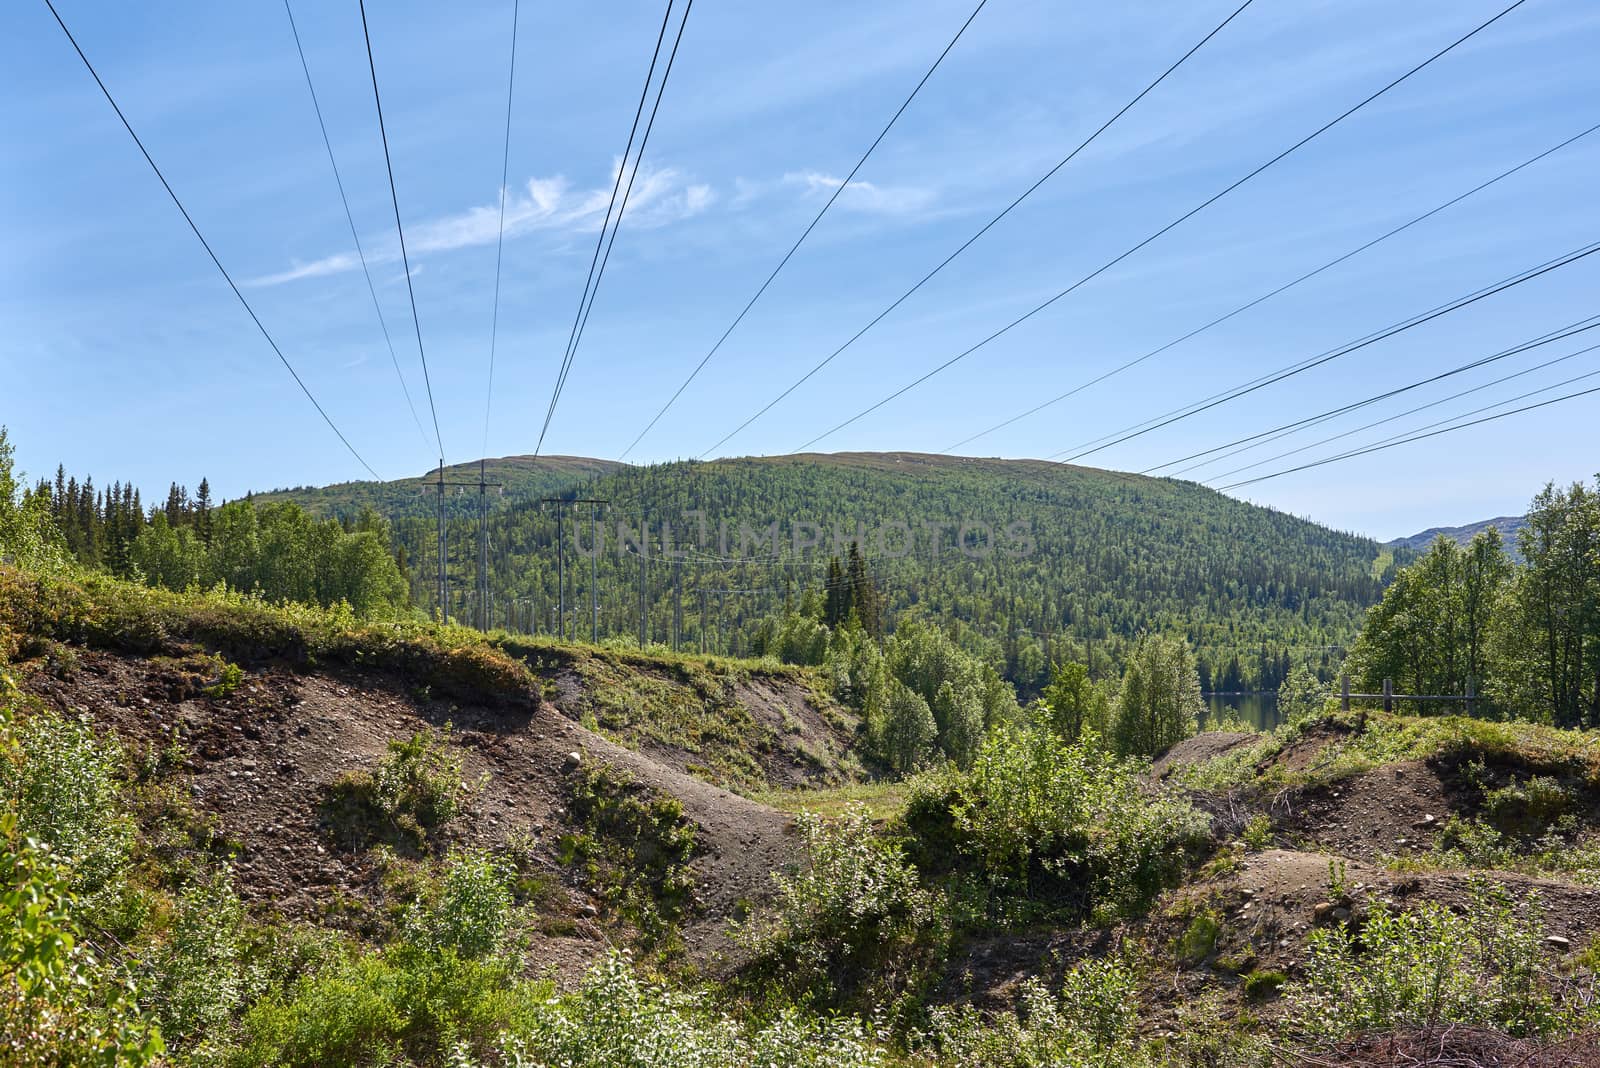 High voltage power lines into the forest. Overhead shot.